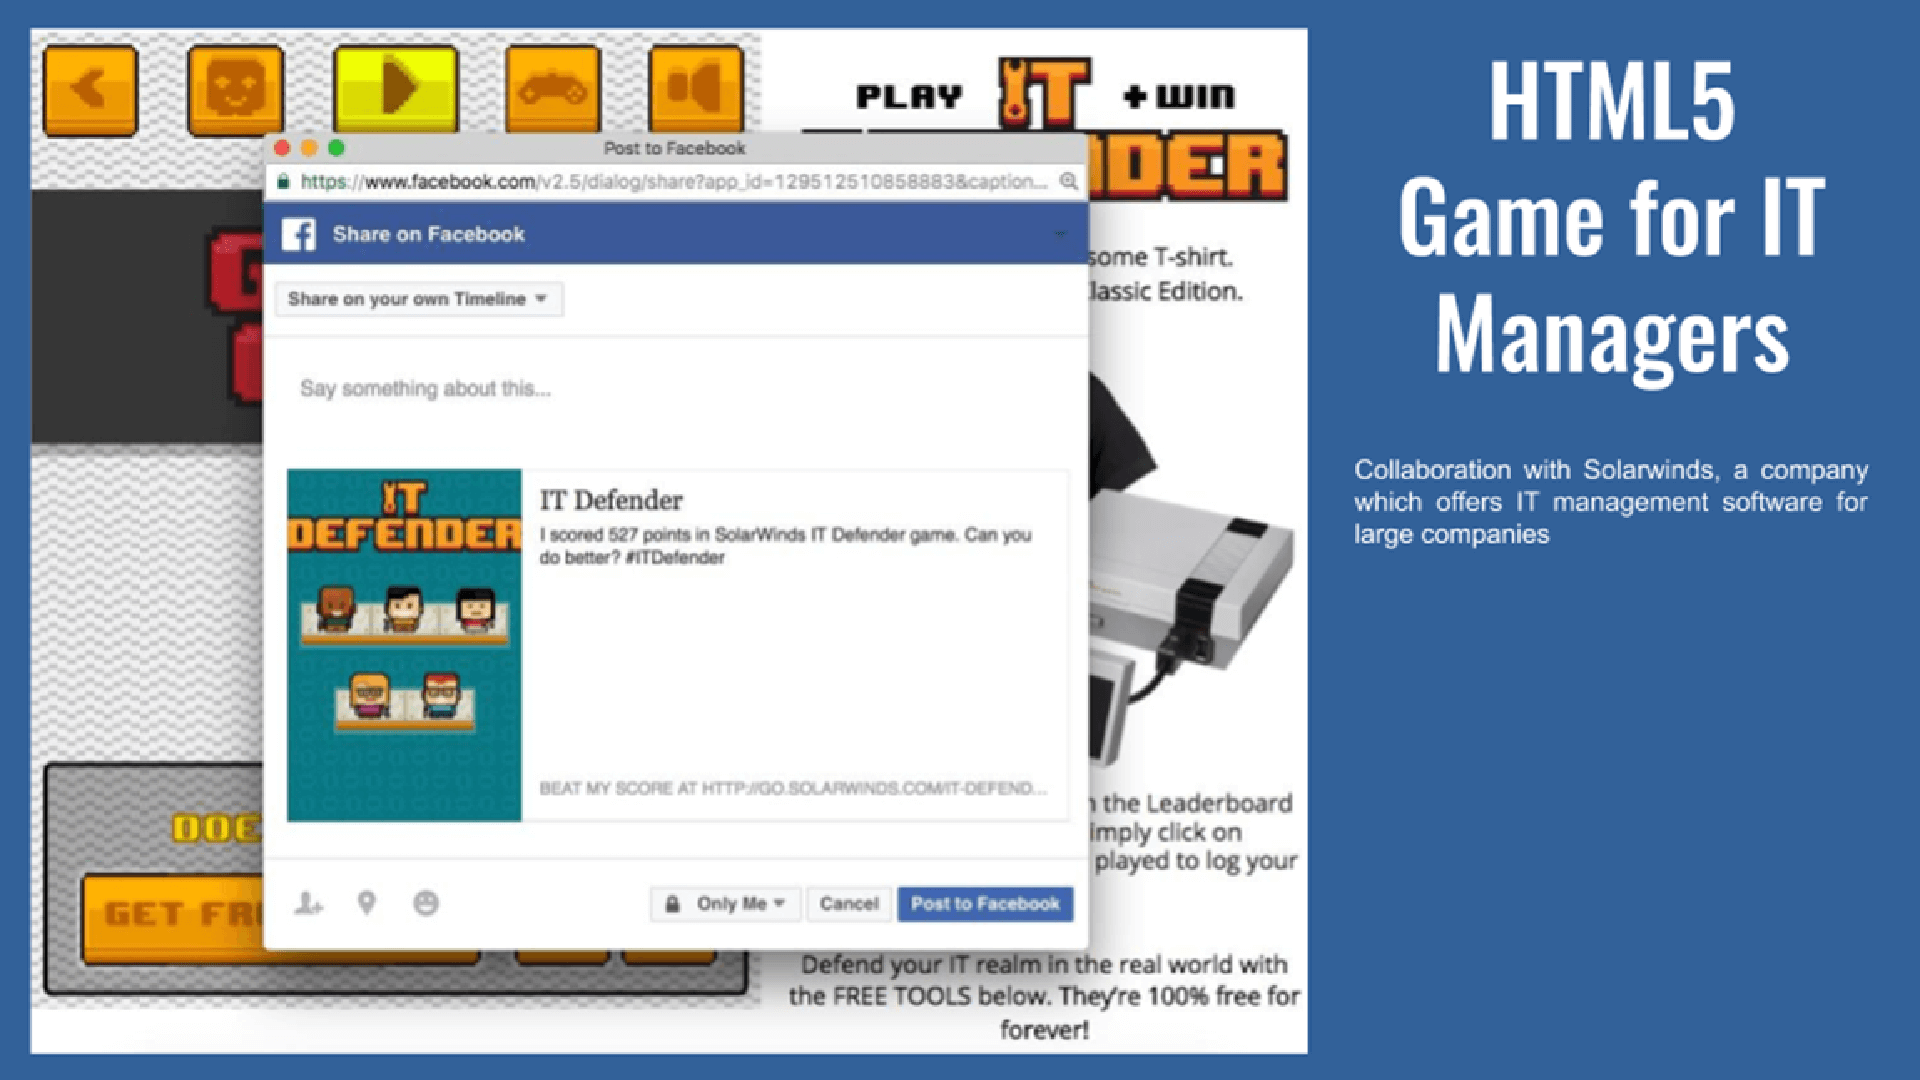 HTML5 Games For Human Resource Management (HRM)